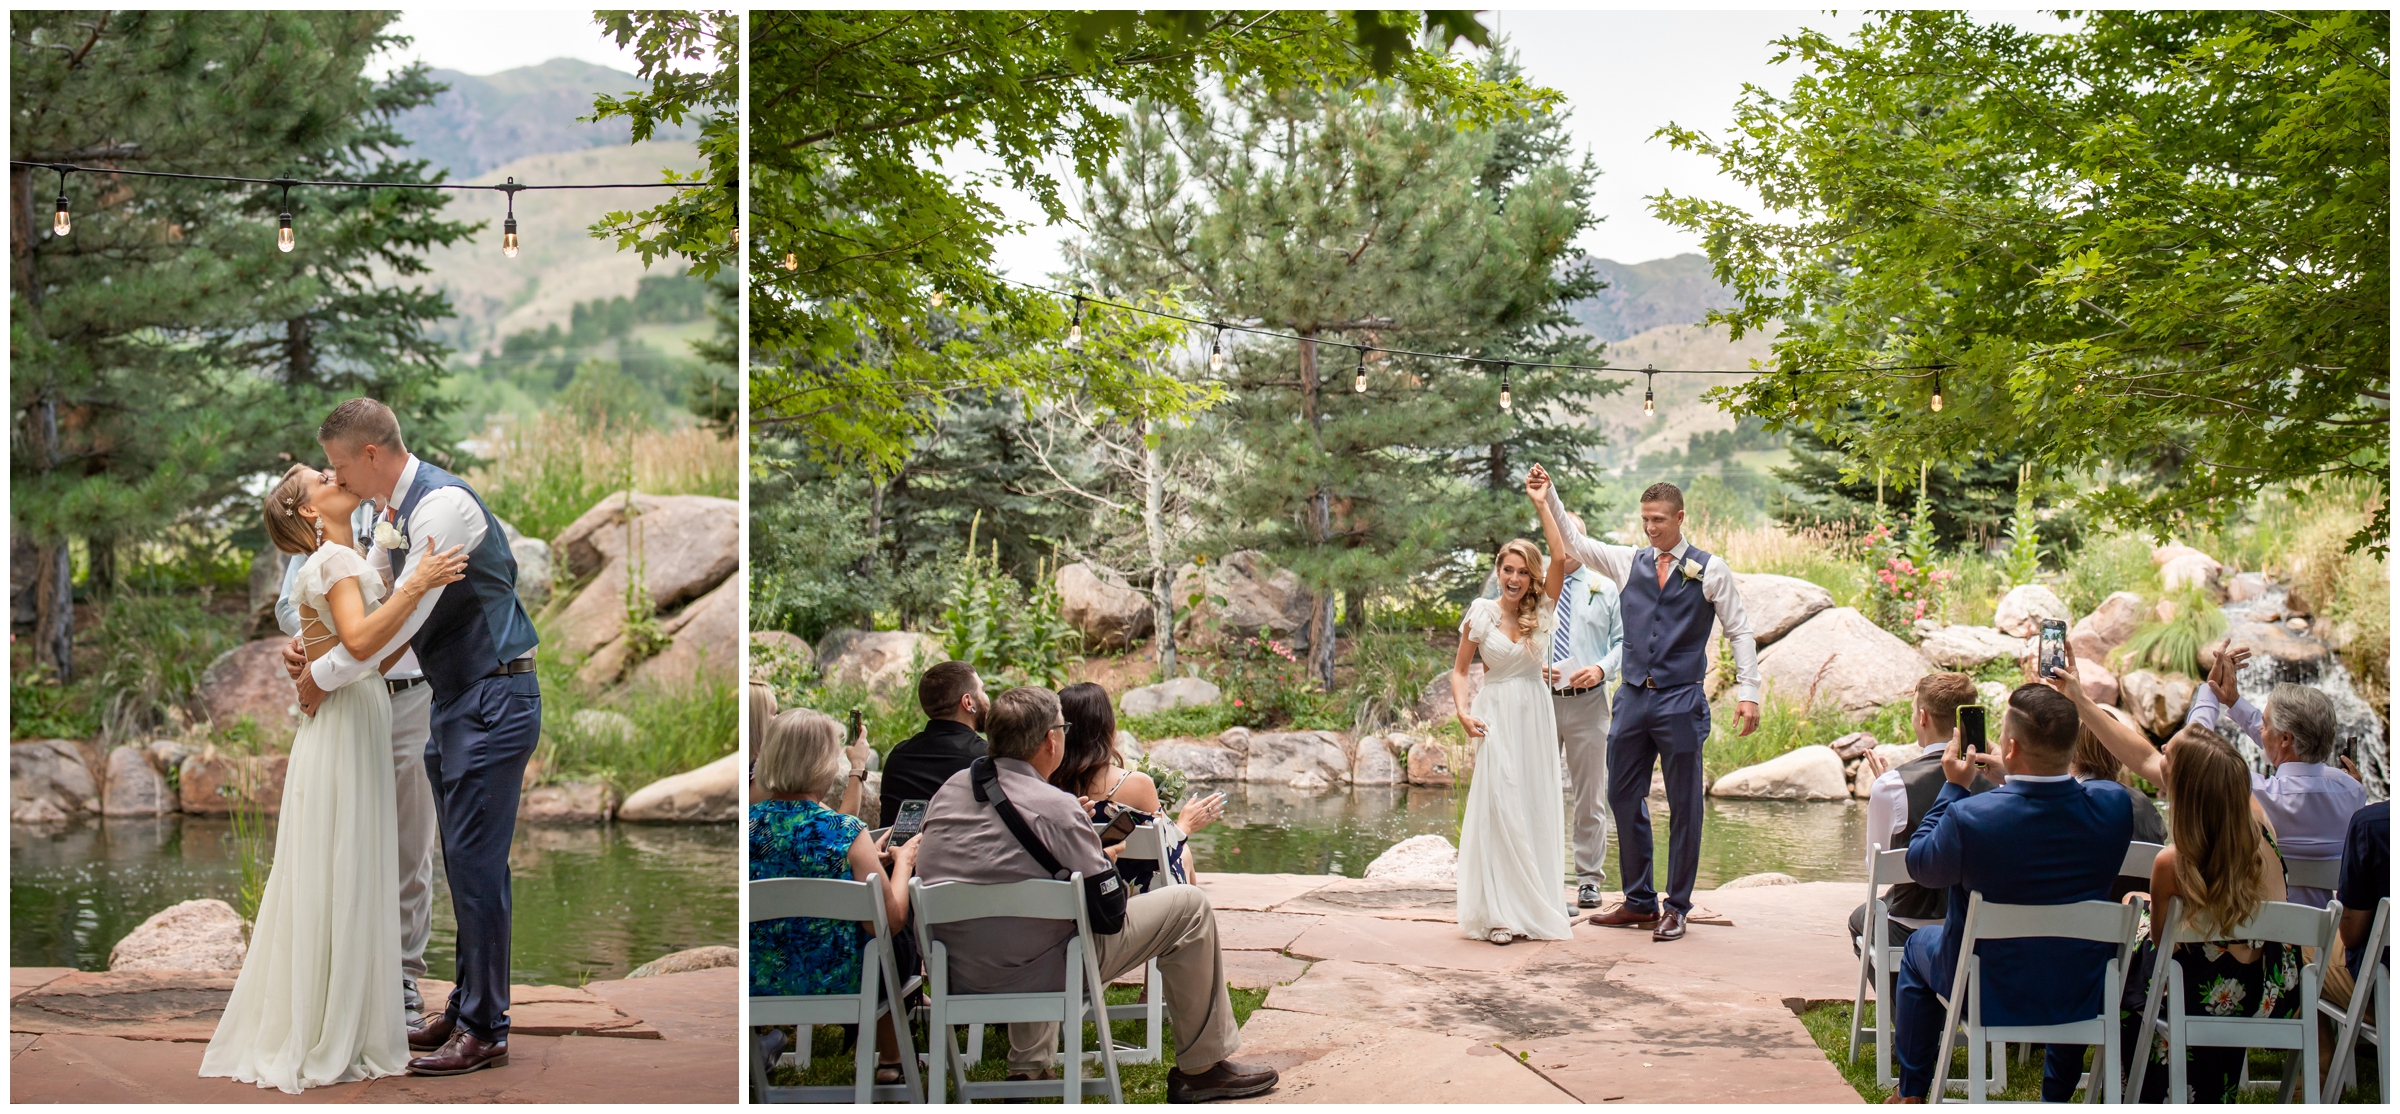 first kiss during outdoor wedding ceremony at the Greenbriar Inn by Boulder photographer Plum Pretty Photography 